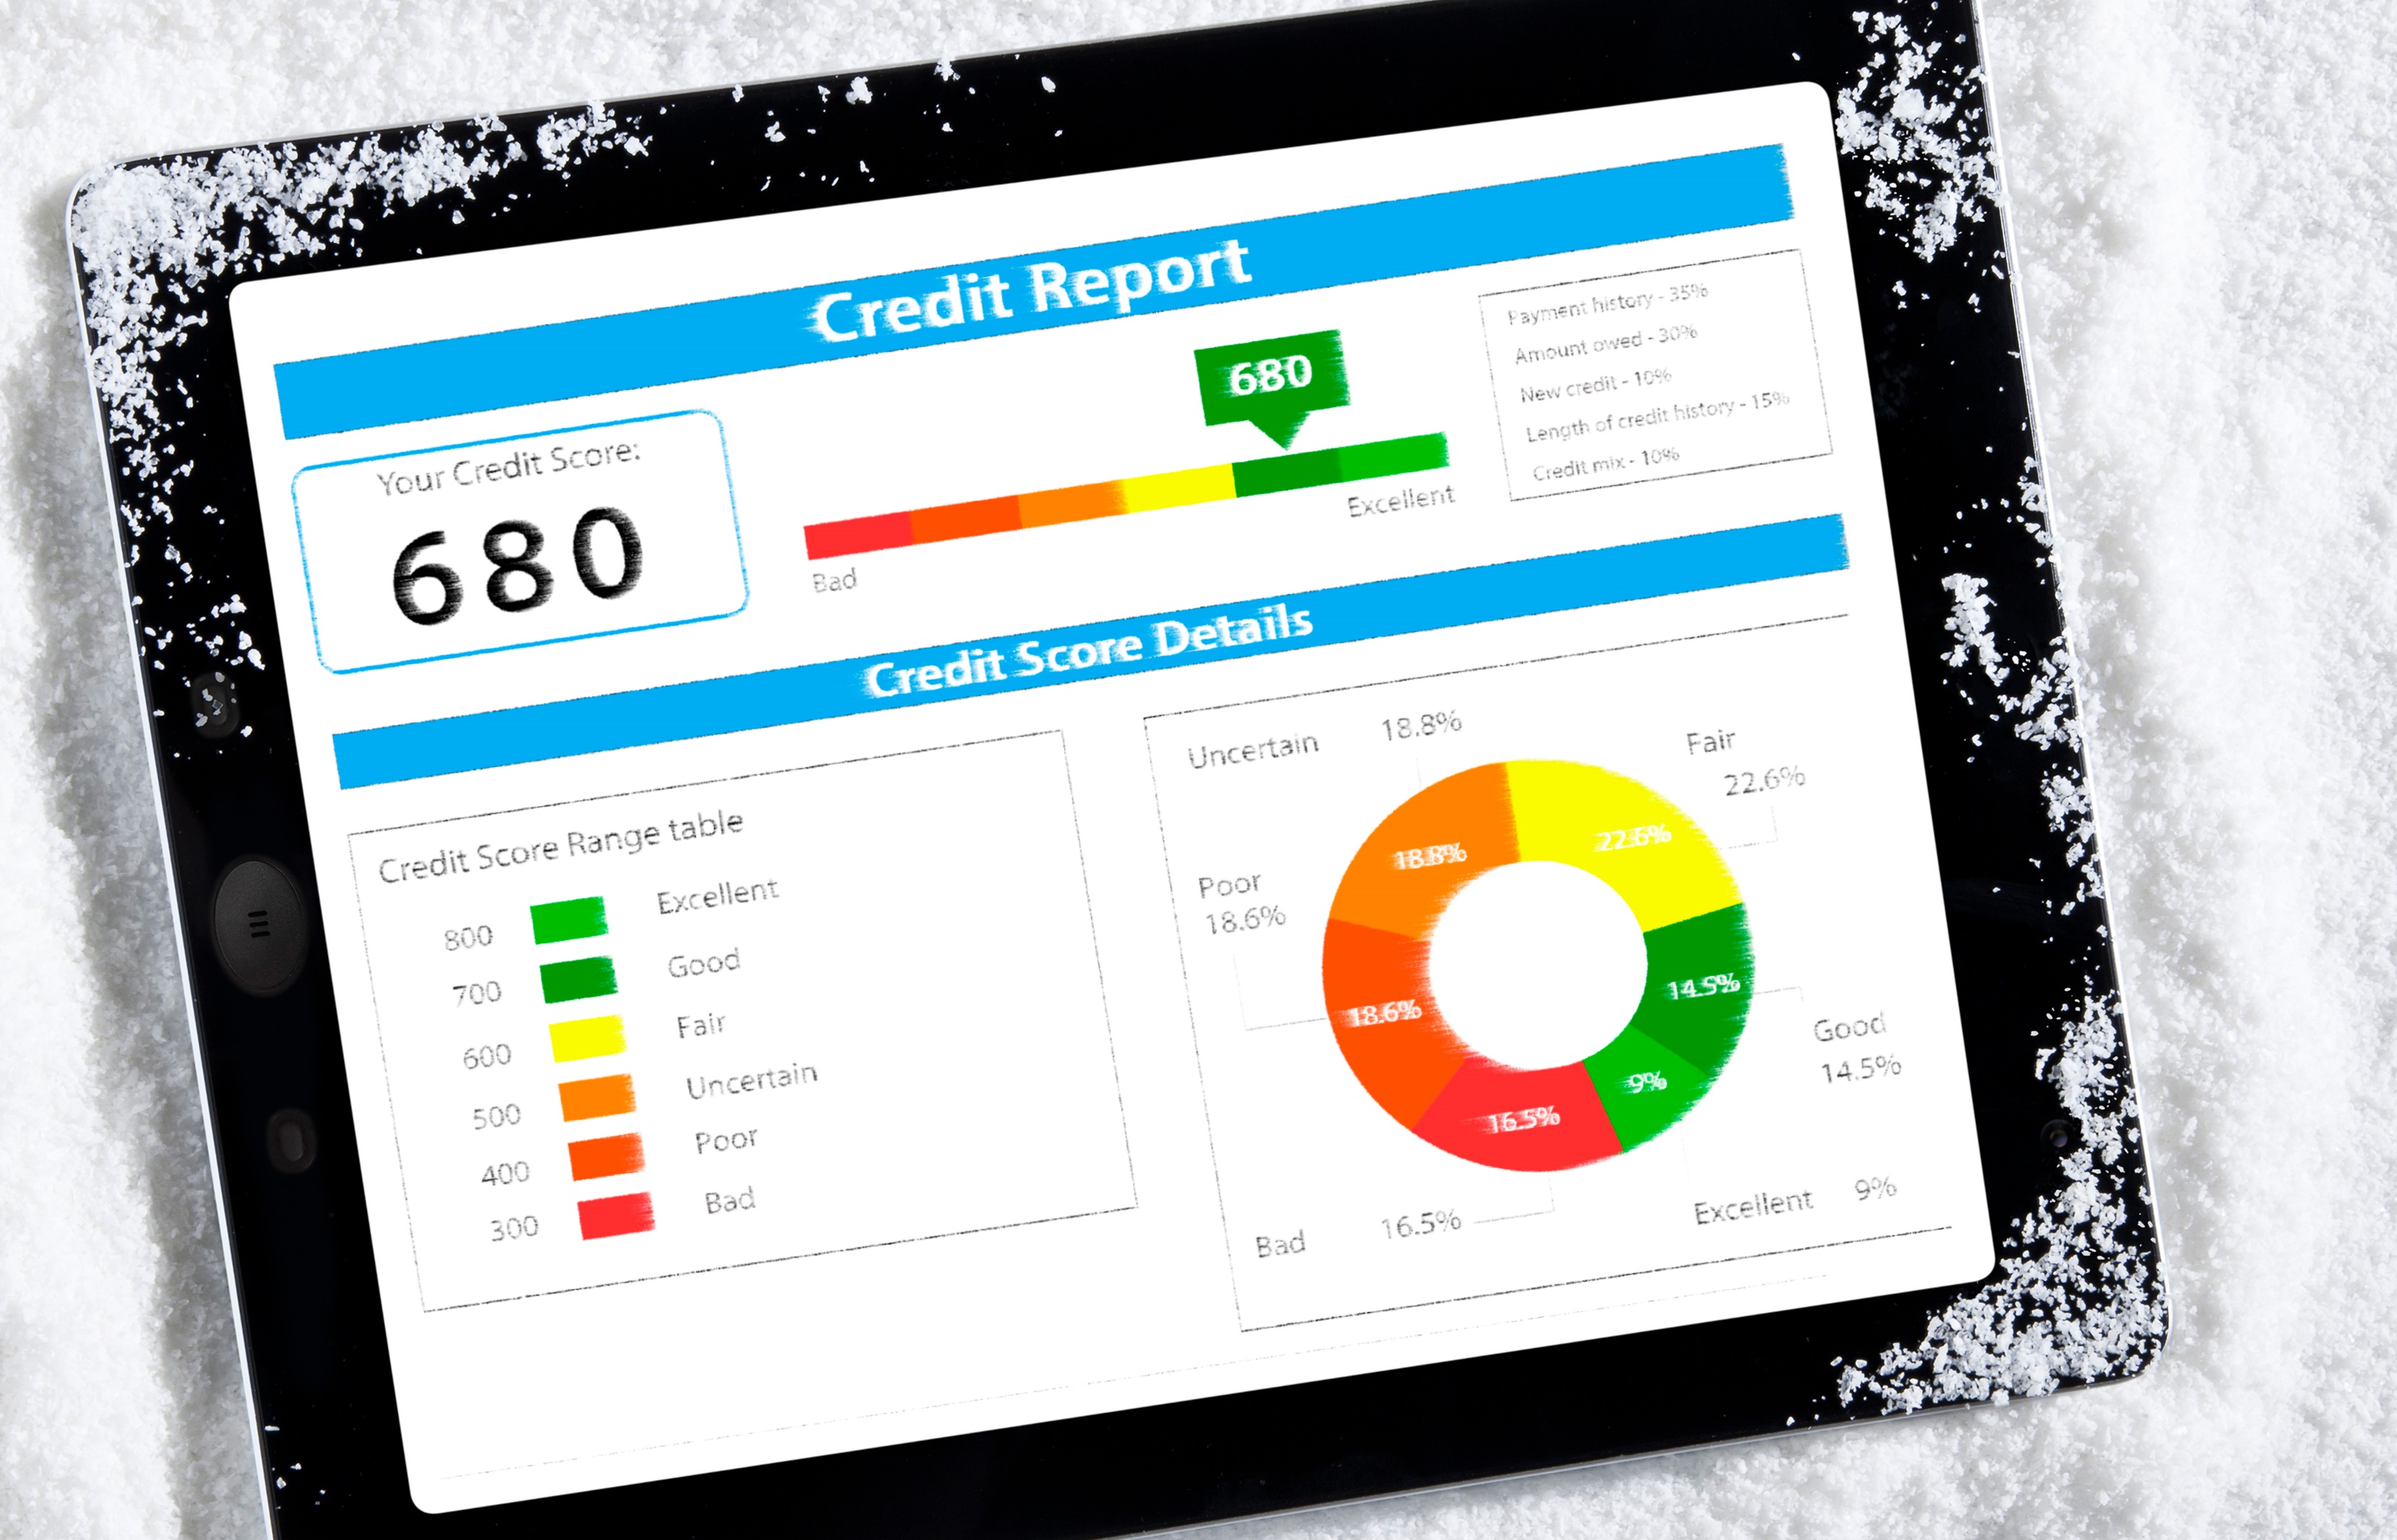 iPad covered in snow displays online credit report